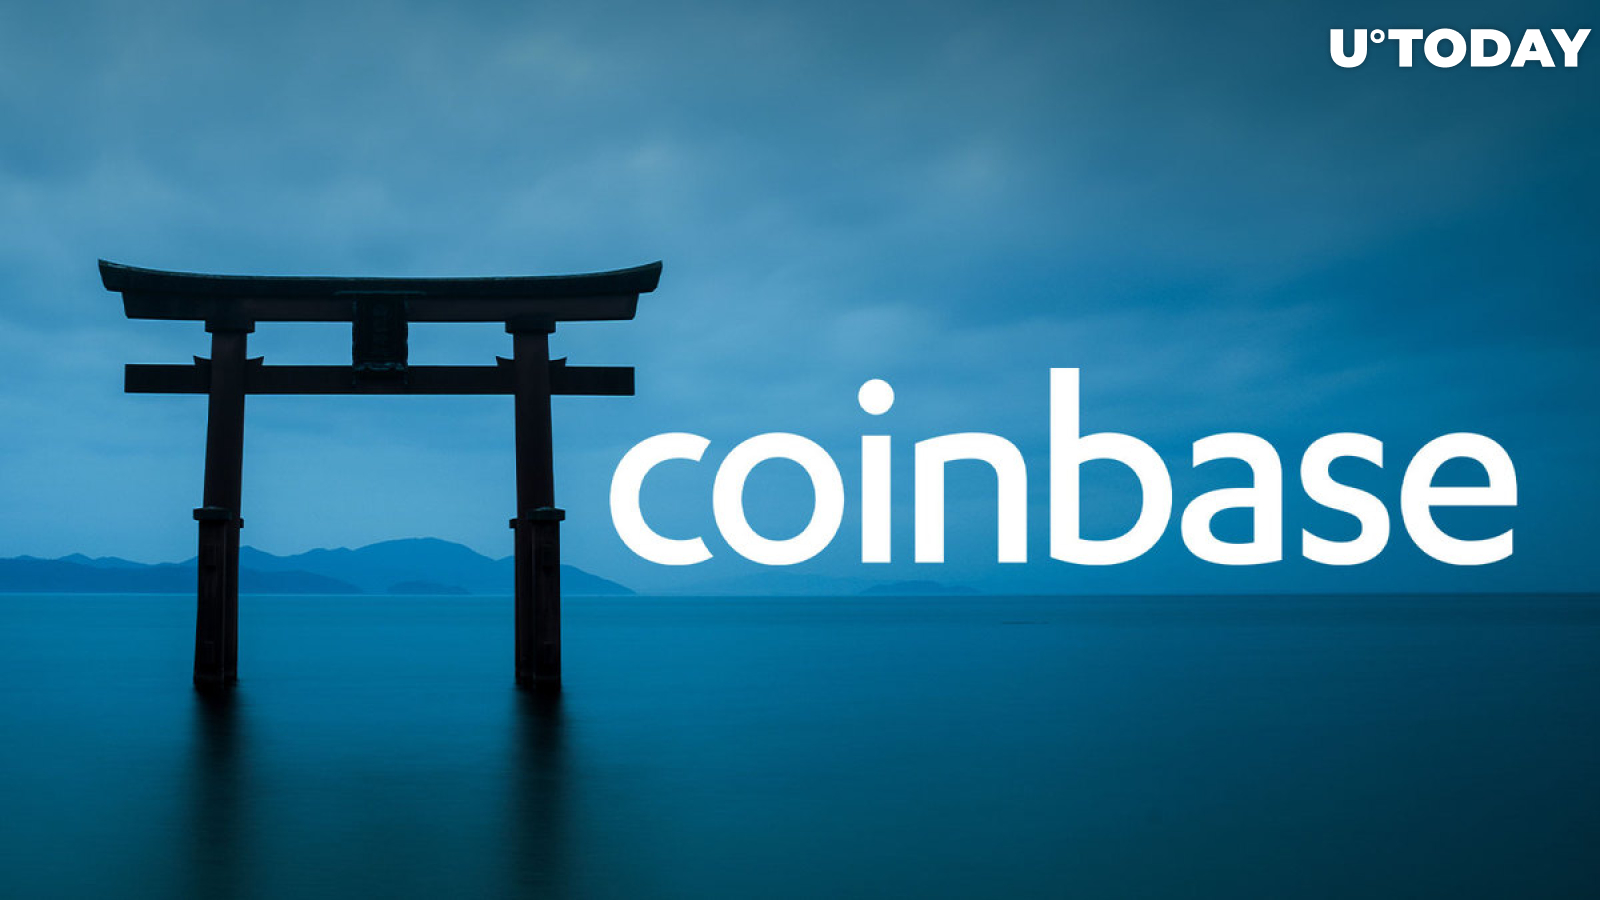 Coinbase Closing Down Operations in Japan: Details